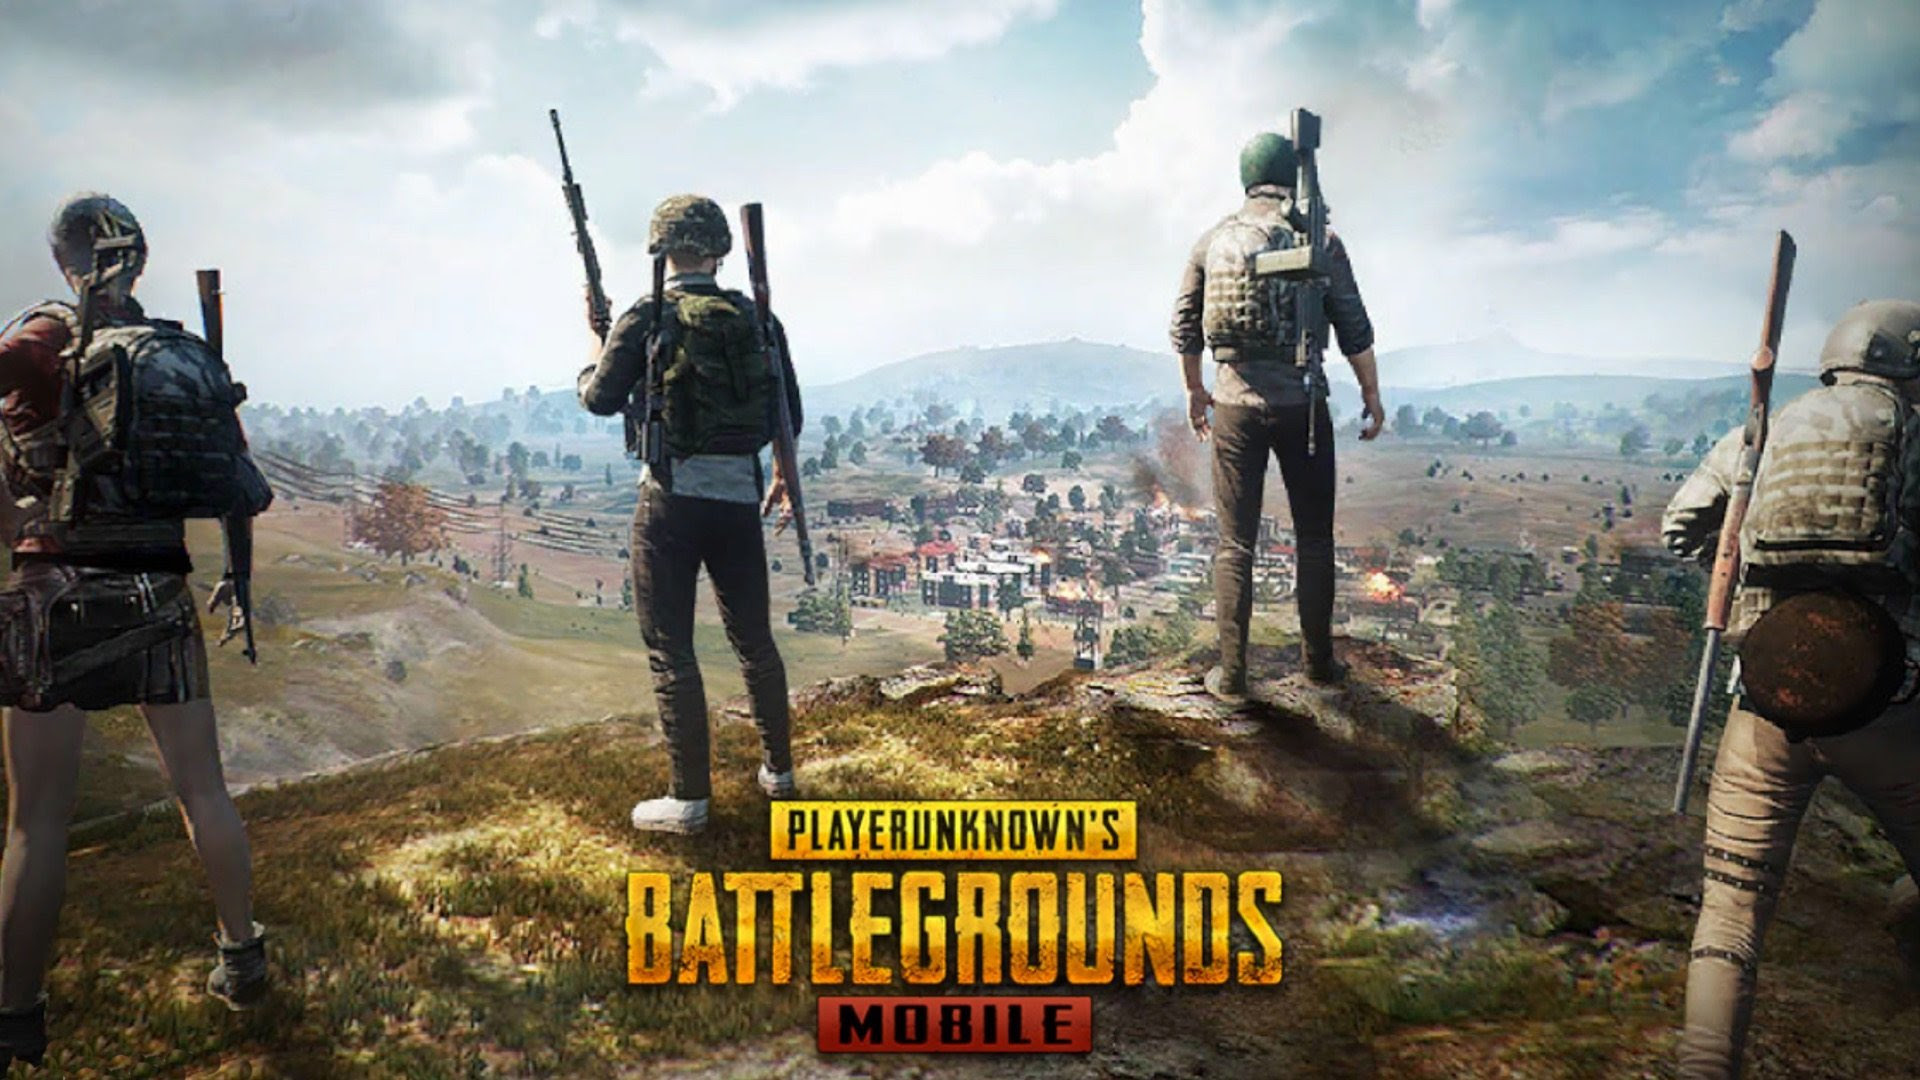 Pubg Game Images Hd Wallpaper - pubg mobile game wallpaper the high definition wallpapers pubg wallpapers hd backgrounds images pics photos free download